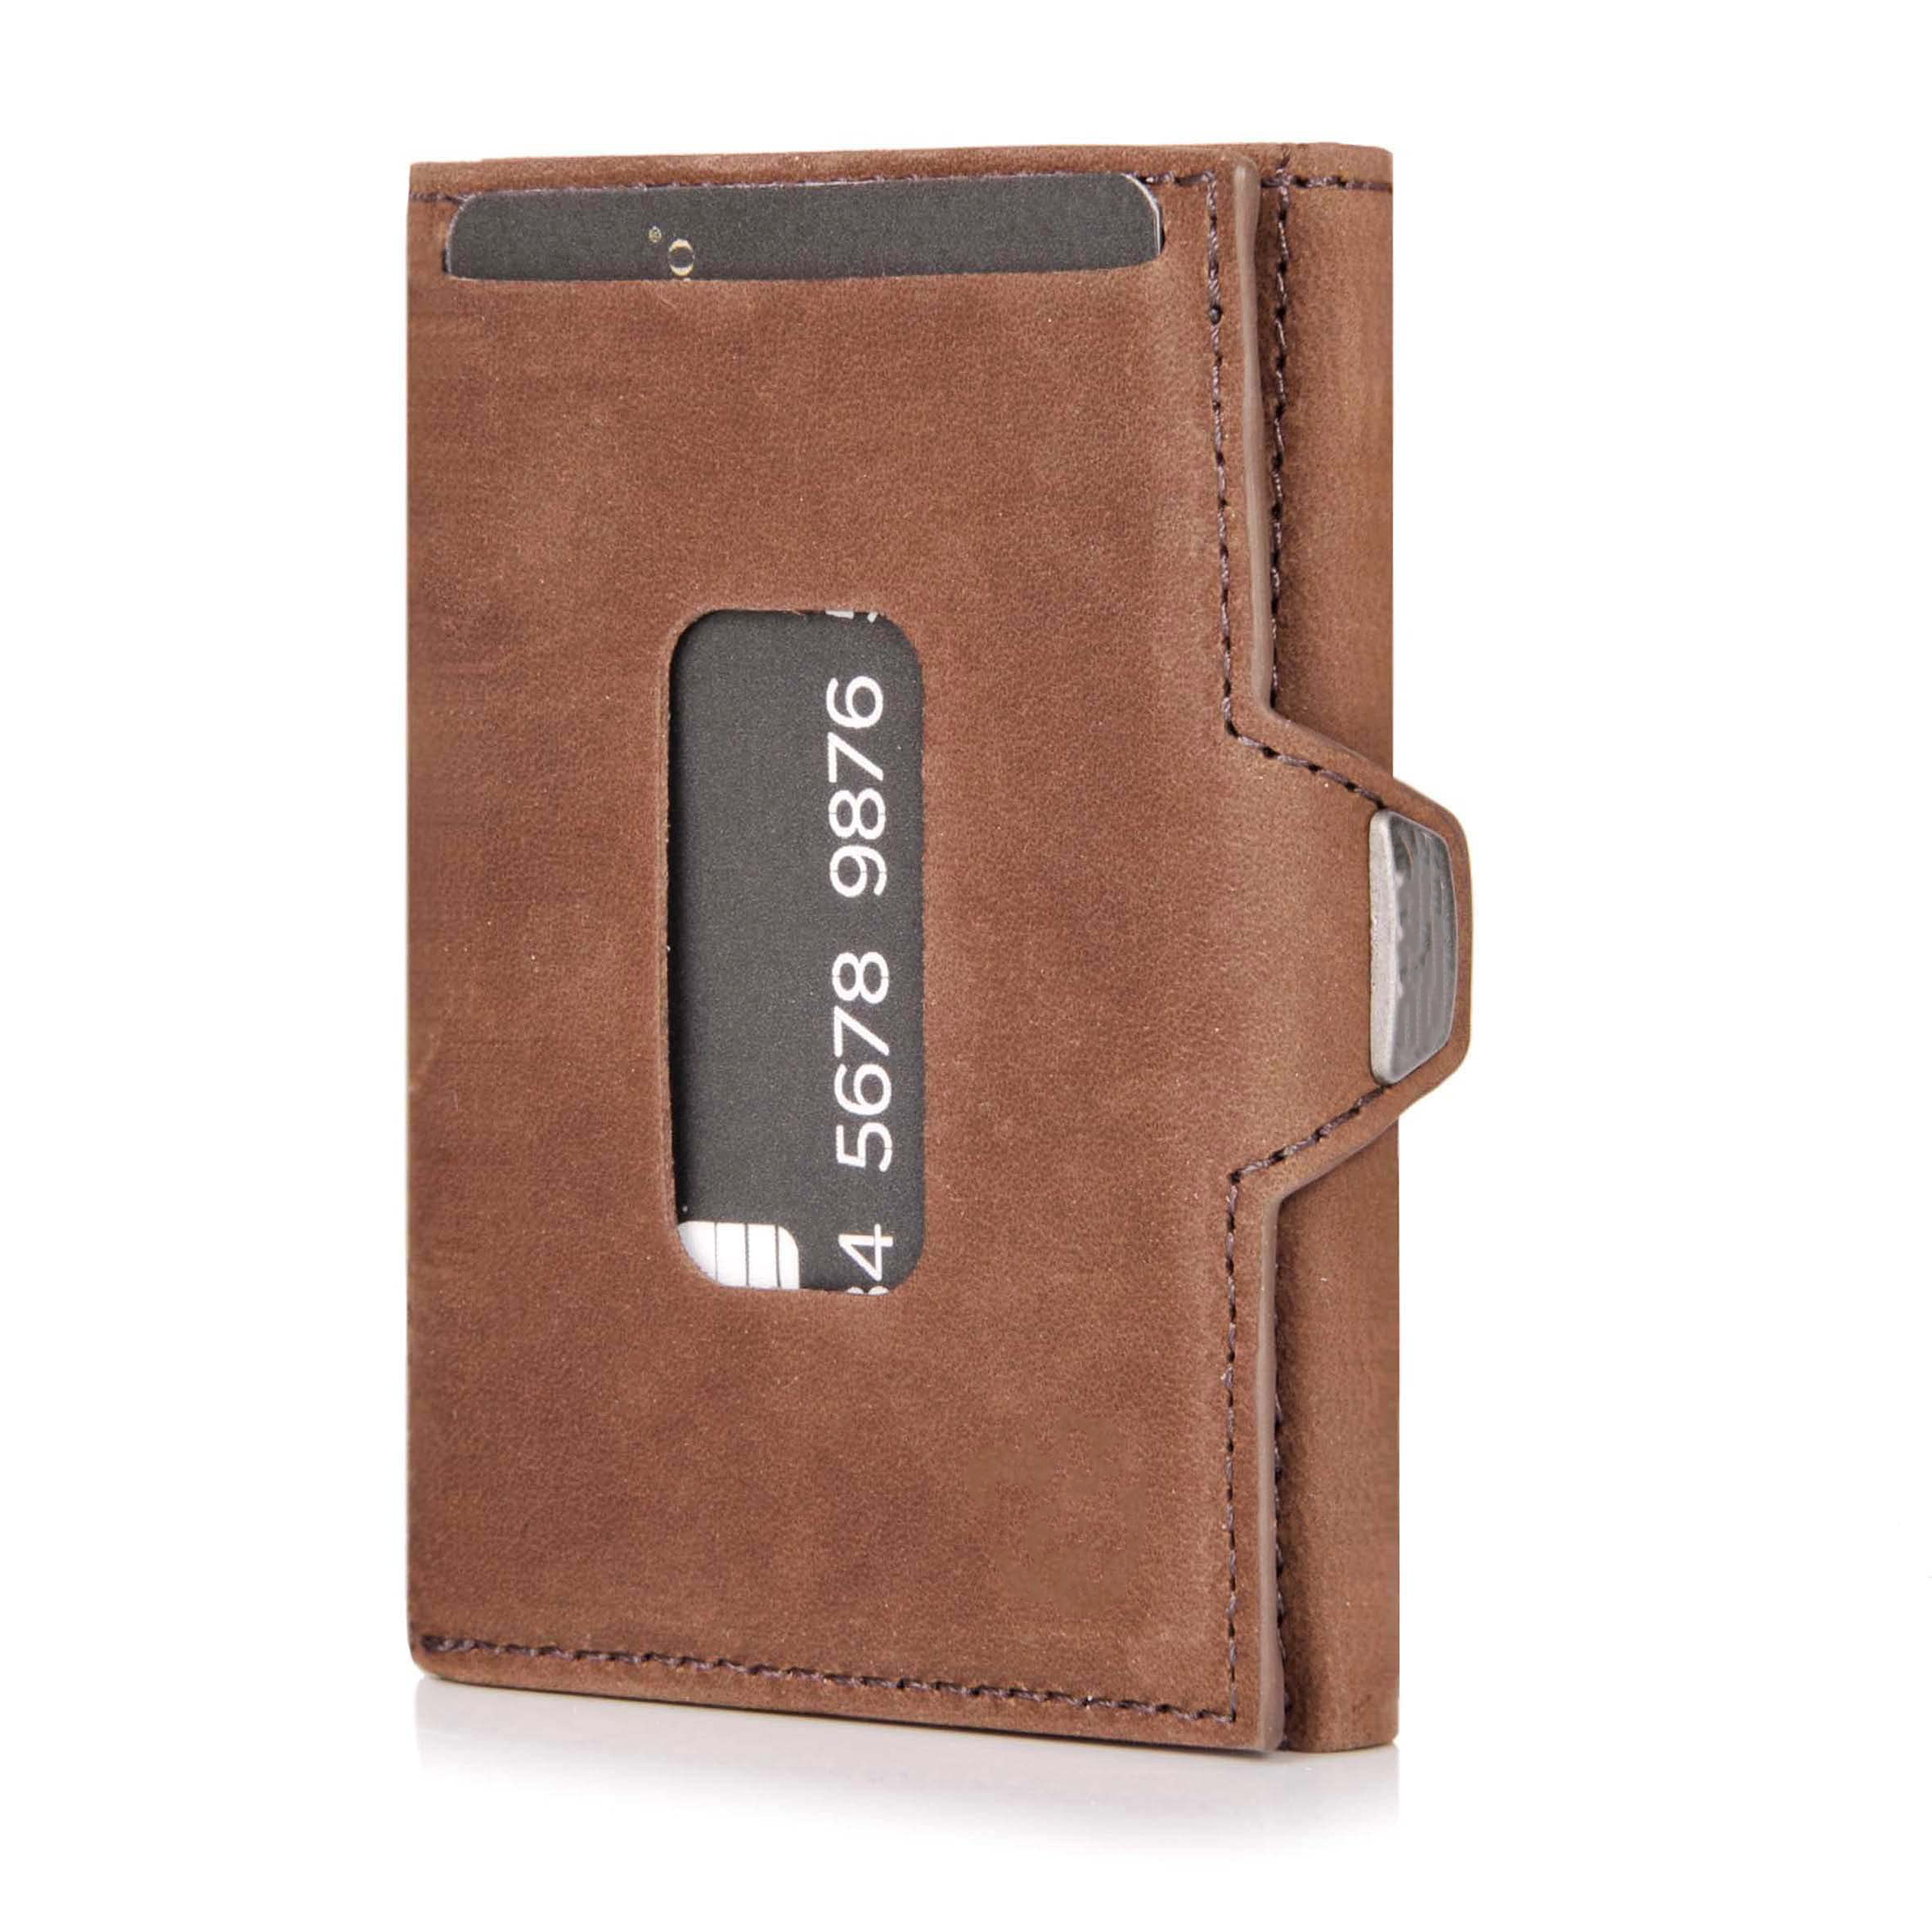 Luxury Tri-fold Wallet High Quality Leather Men Wallet